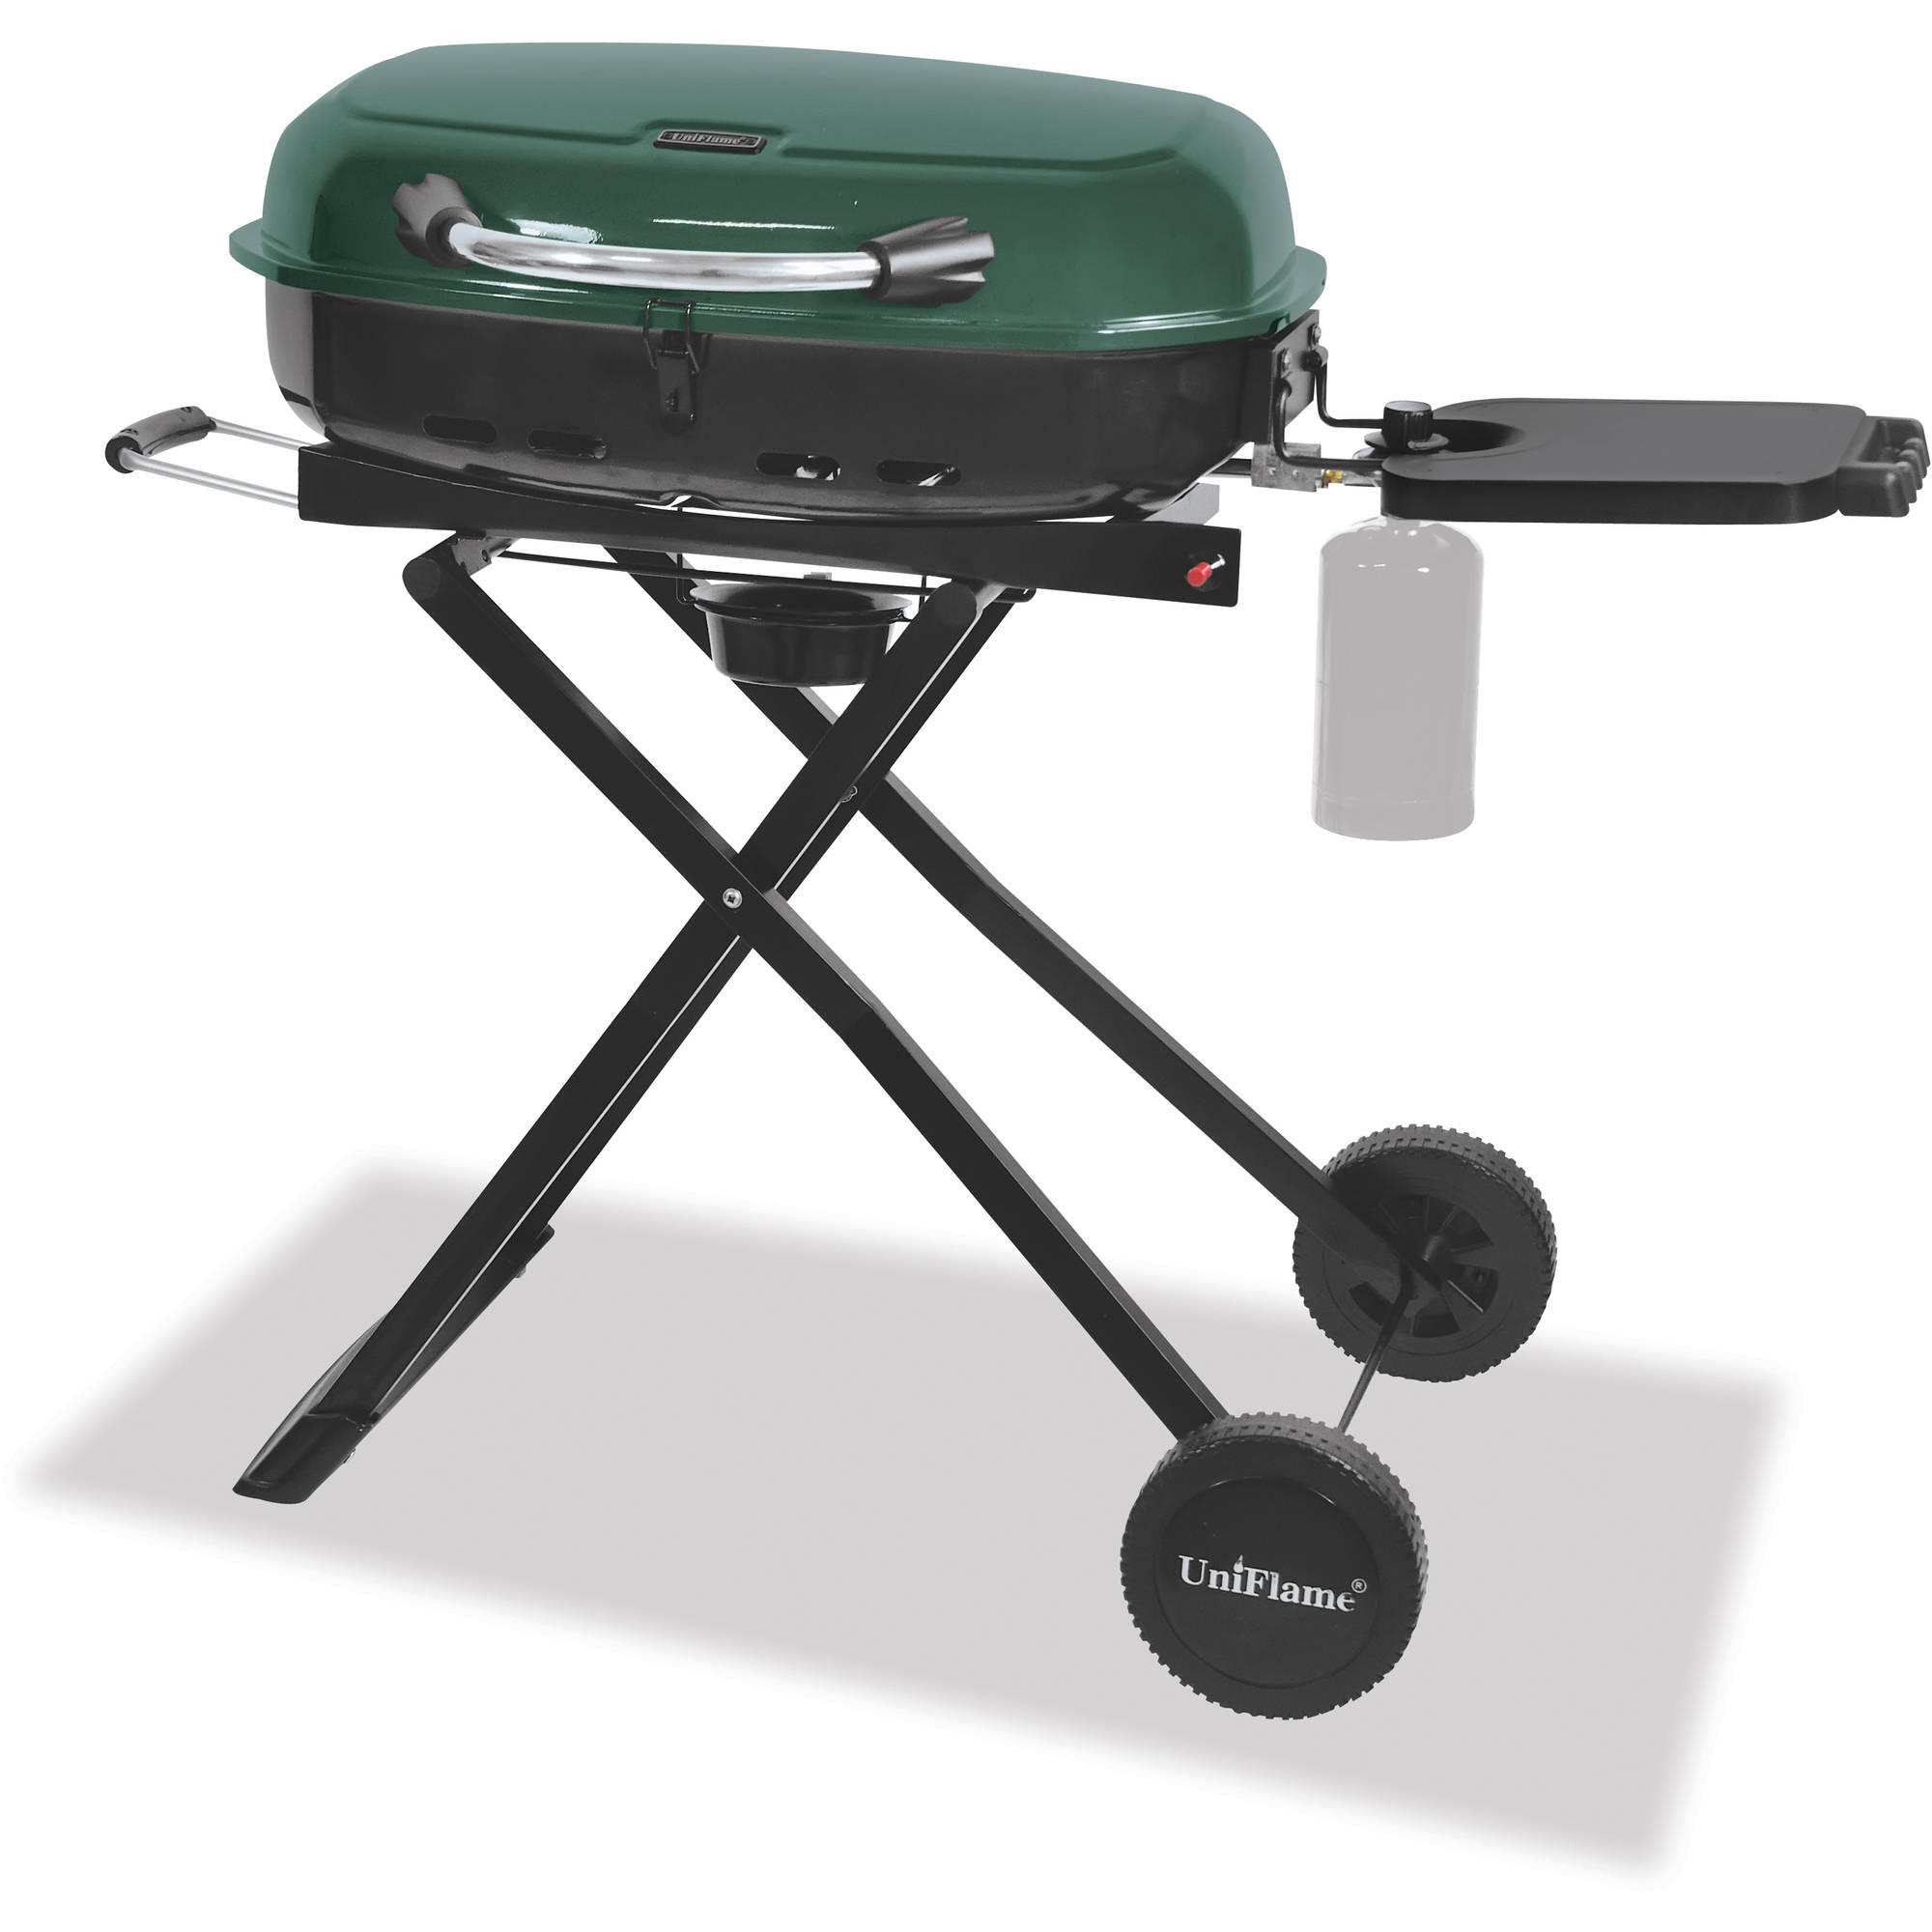 Foldable Gas Tailgate Grill - Green - image 2 of 4